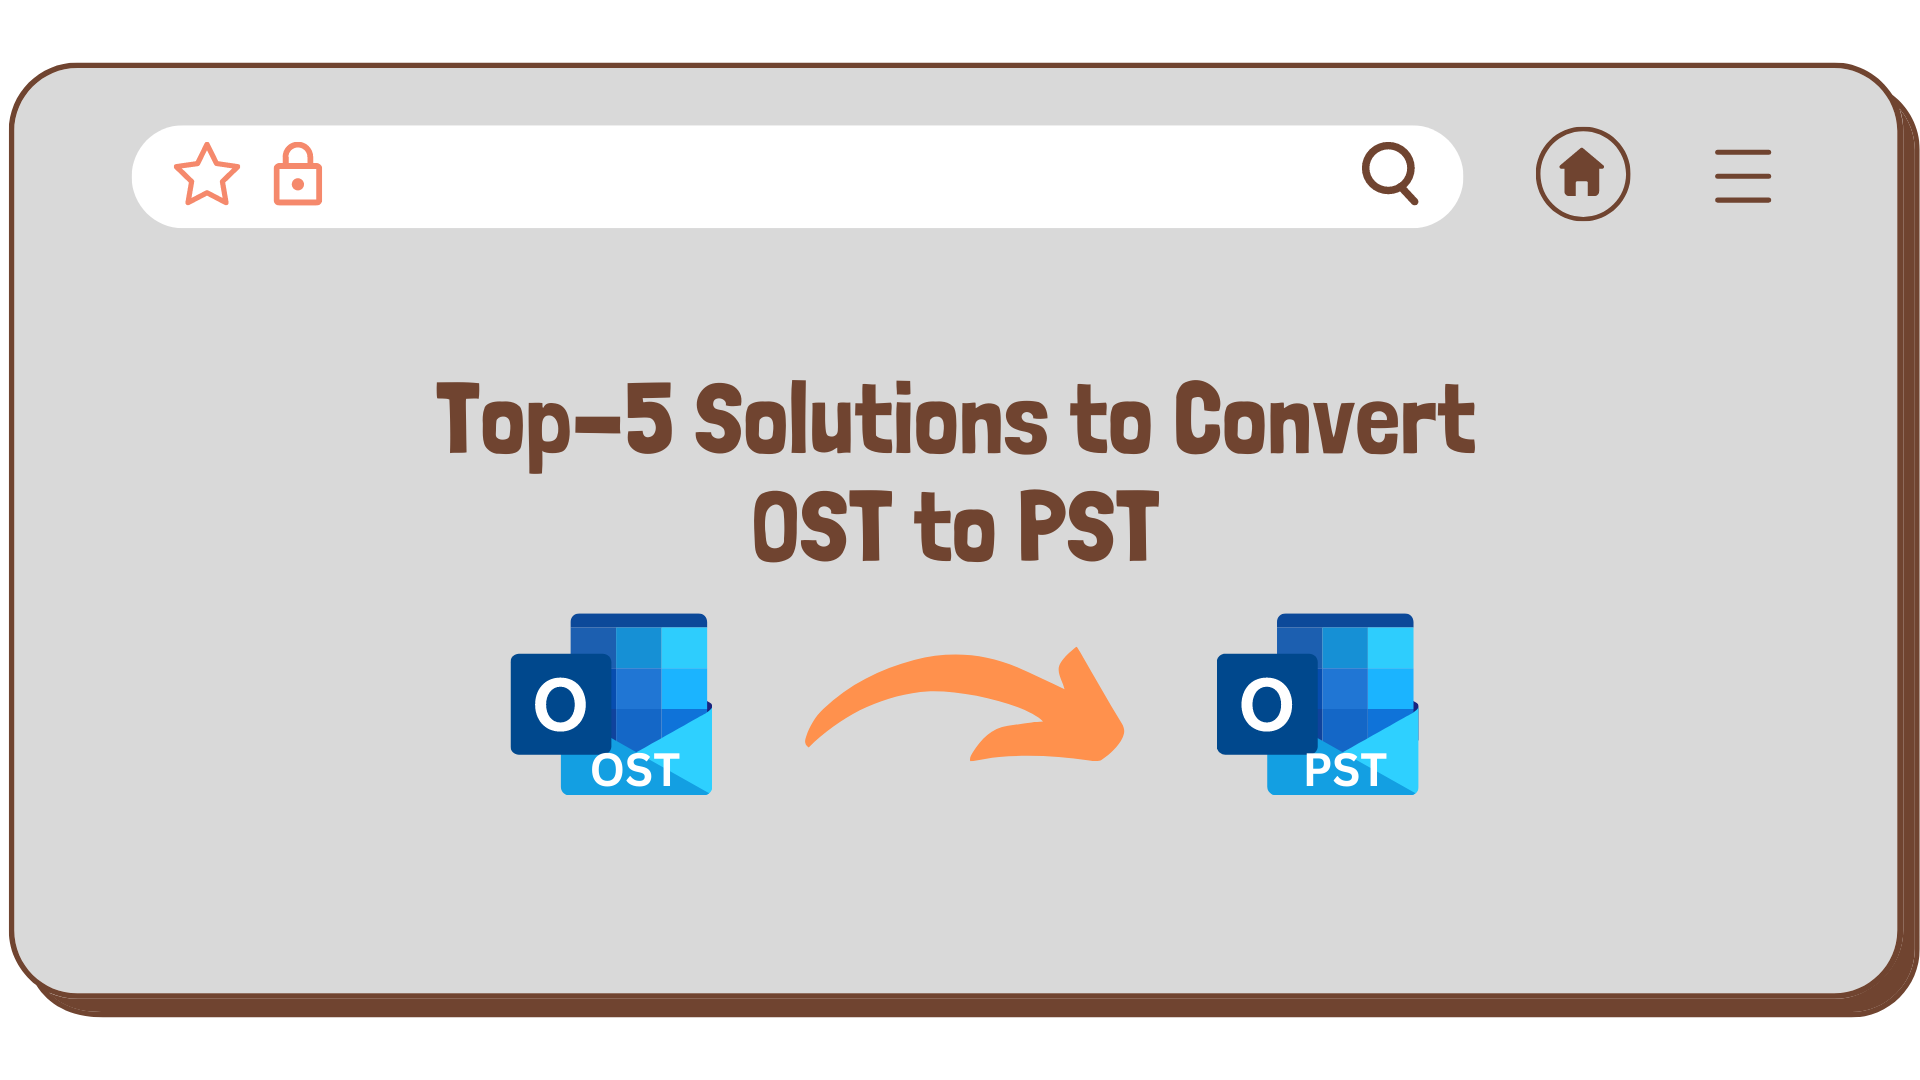 Q ® =

Top=&gt;S Solutions to Convert
OST to PST

ot oo